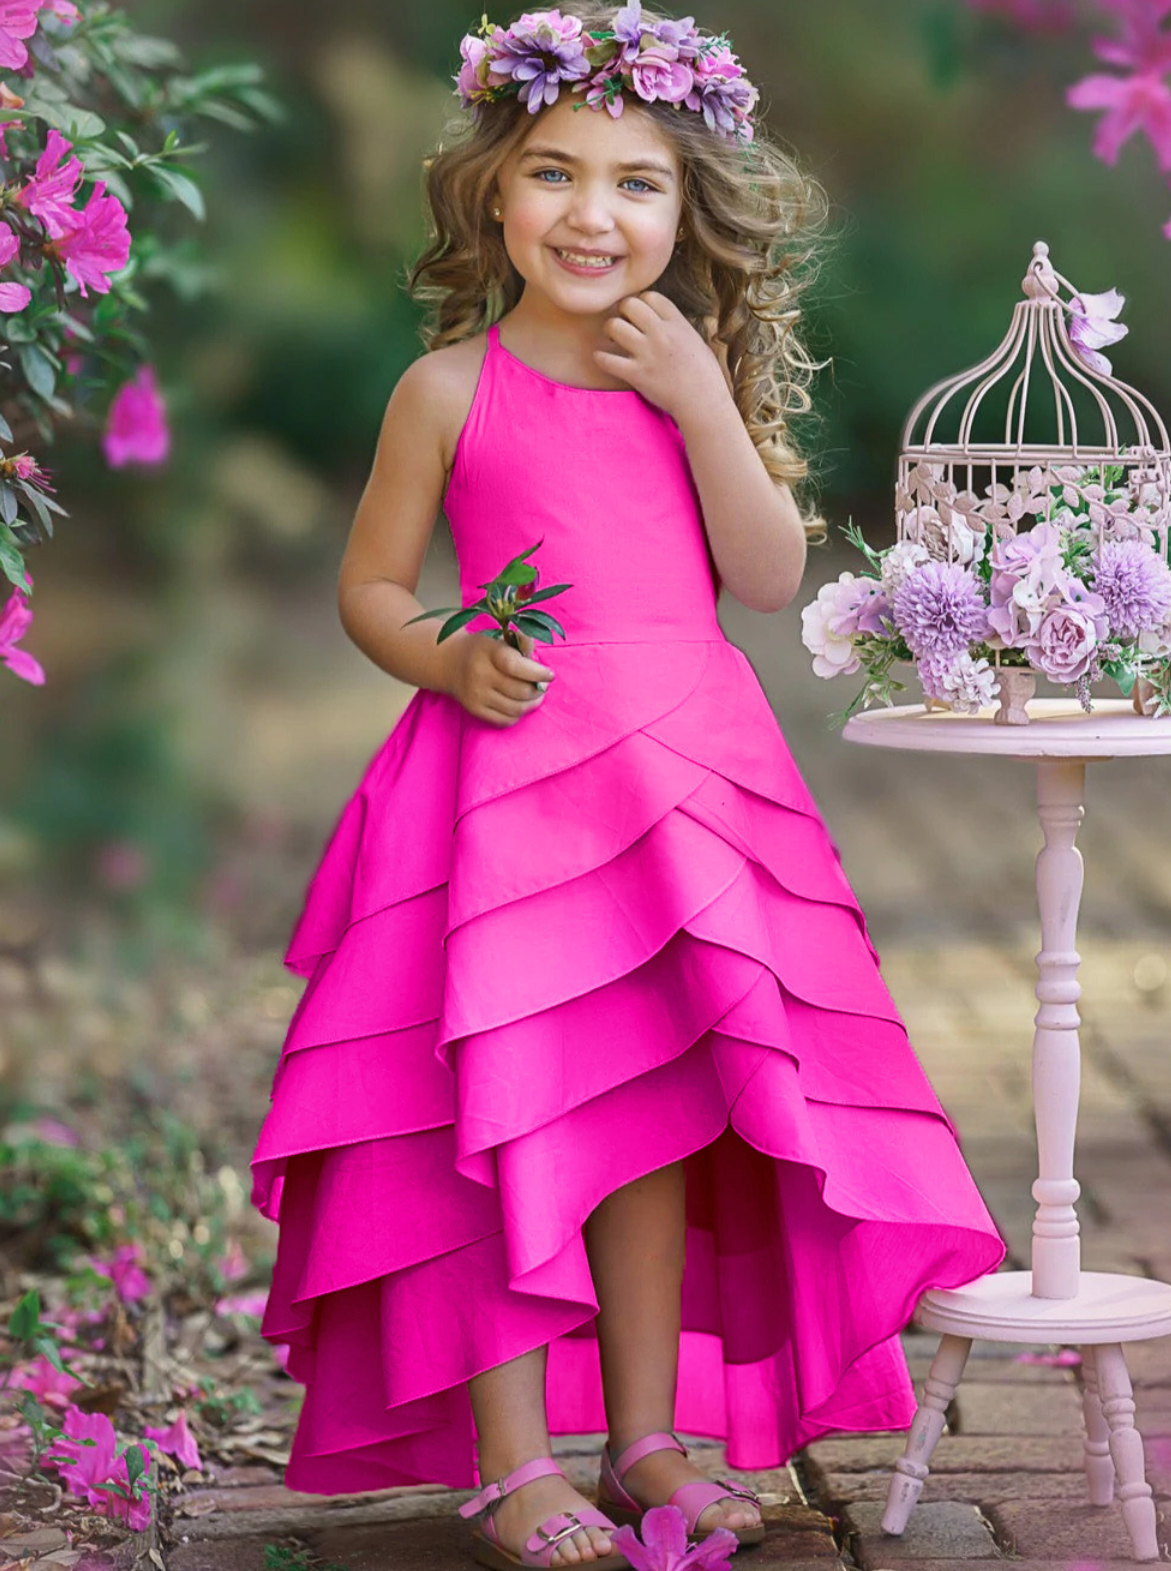 Justice Dress Girls Pink Sequin Tulle Tutu Layer Party Dress NEW Sizes 14  16 18 | eBay